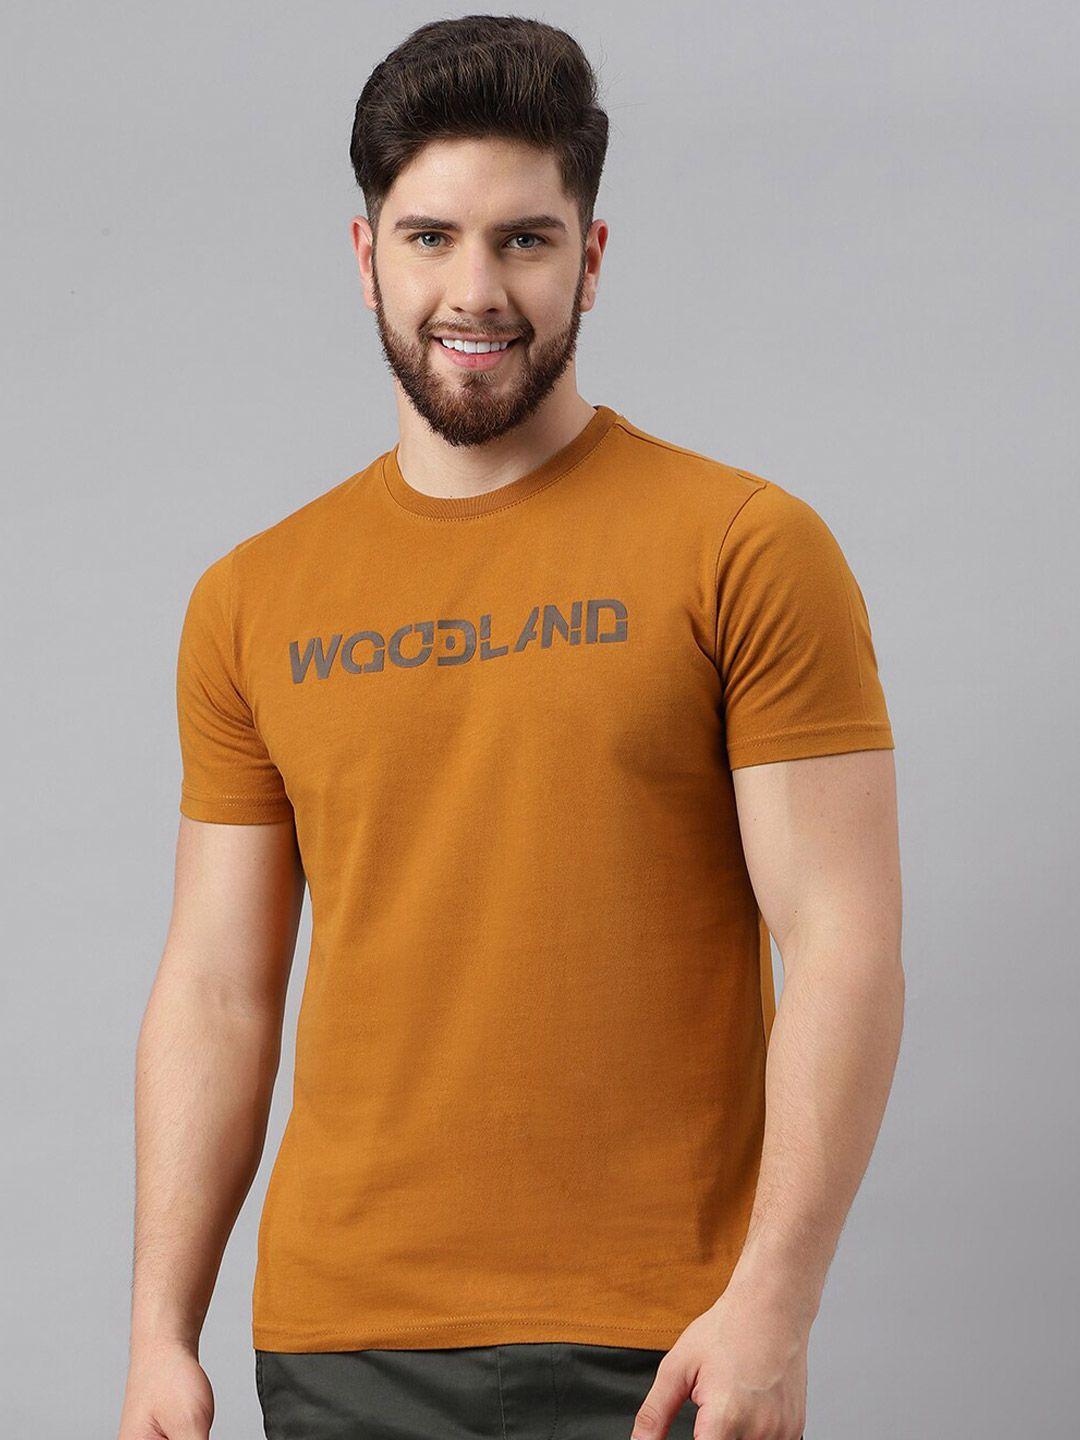 woodland typography printed pure cotton casual t-shirt